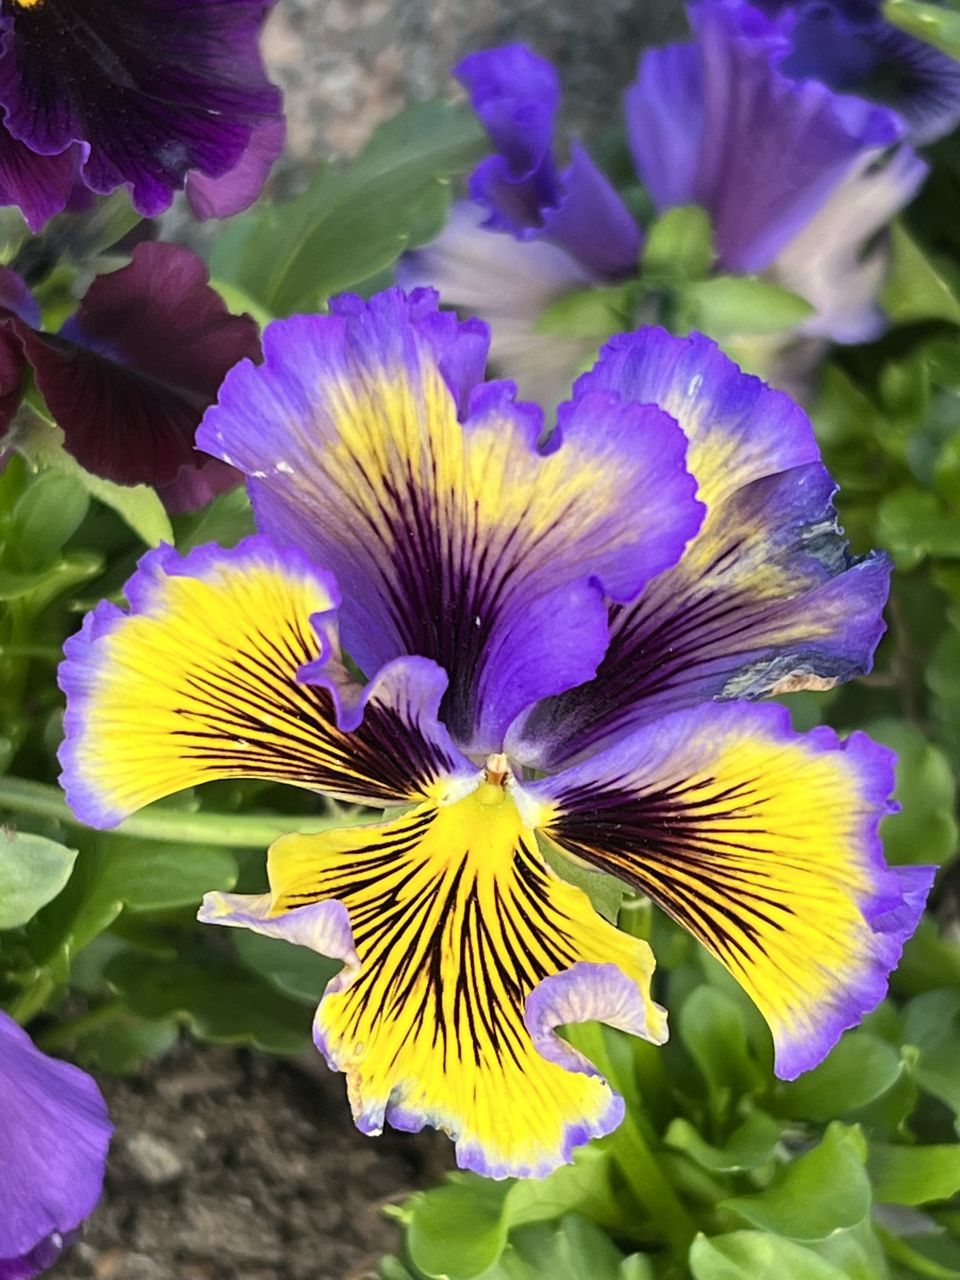 flower, flowering plant, freshness, plant, beauty in nature, close-up, purple, flower head, fragility, petal, inflorescence, growth, nature, human eye, yellow, iris, focus on foreground, macro photography, pansy, day, outdoors, vibrant color, springtime